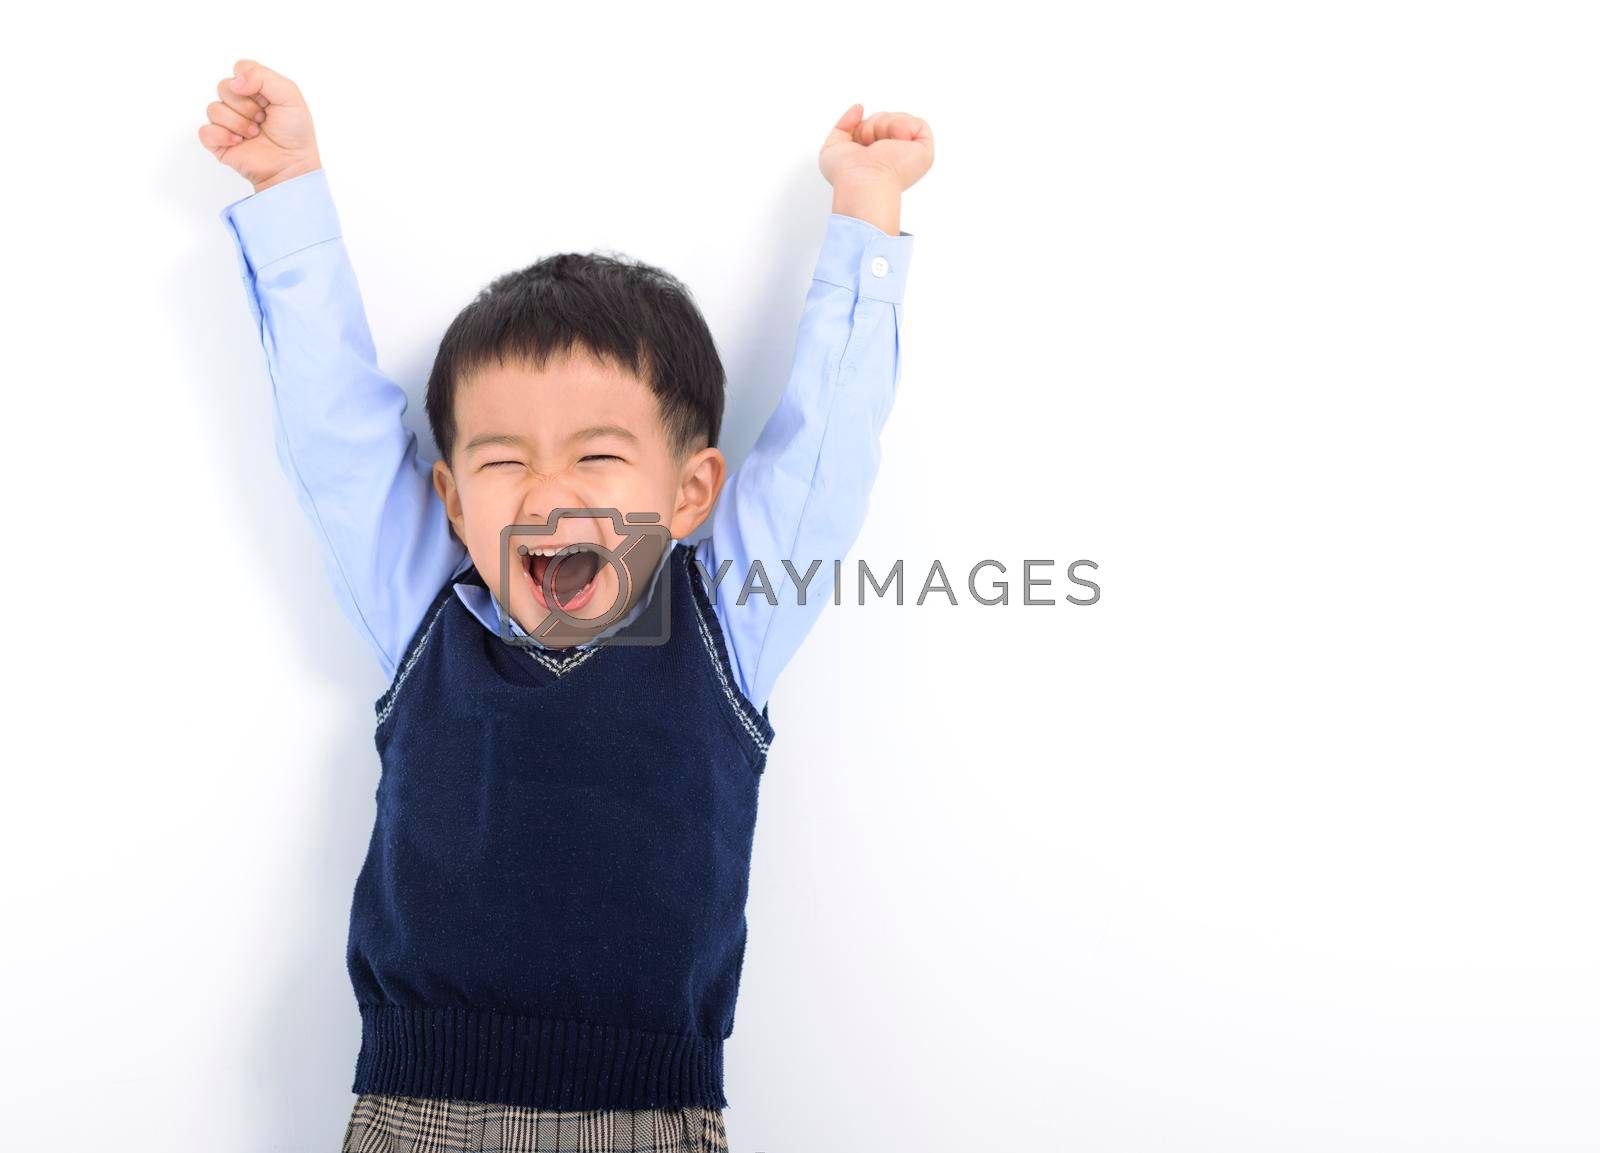 Royalty free image of Happy Kid boy having fun on white background by tomwang